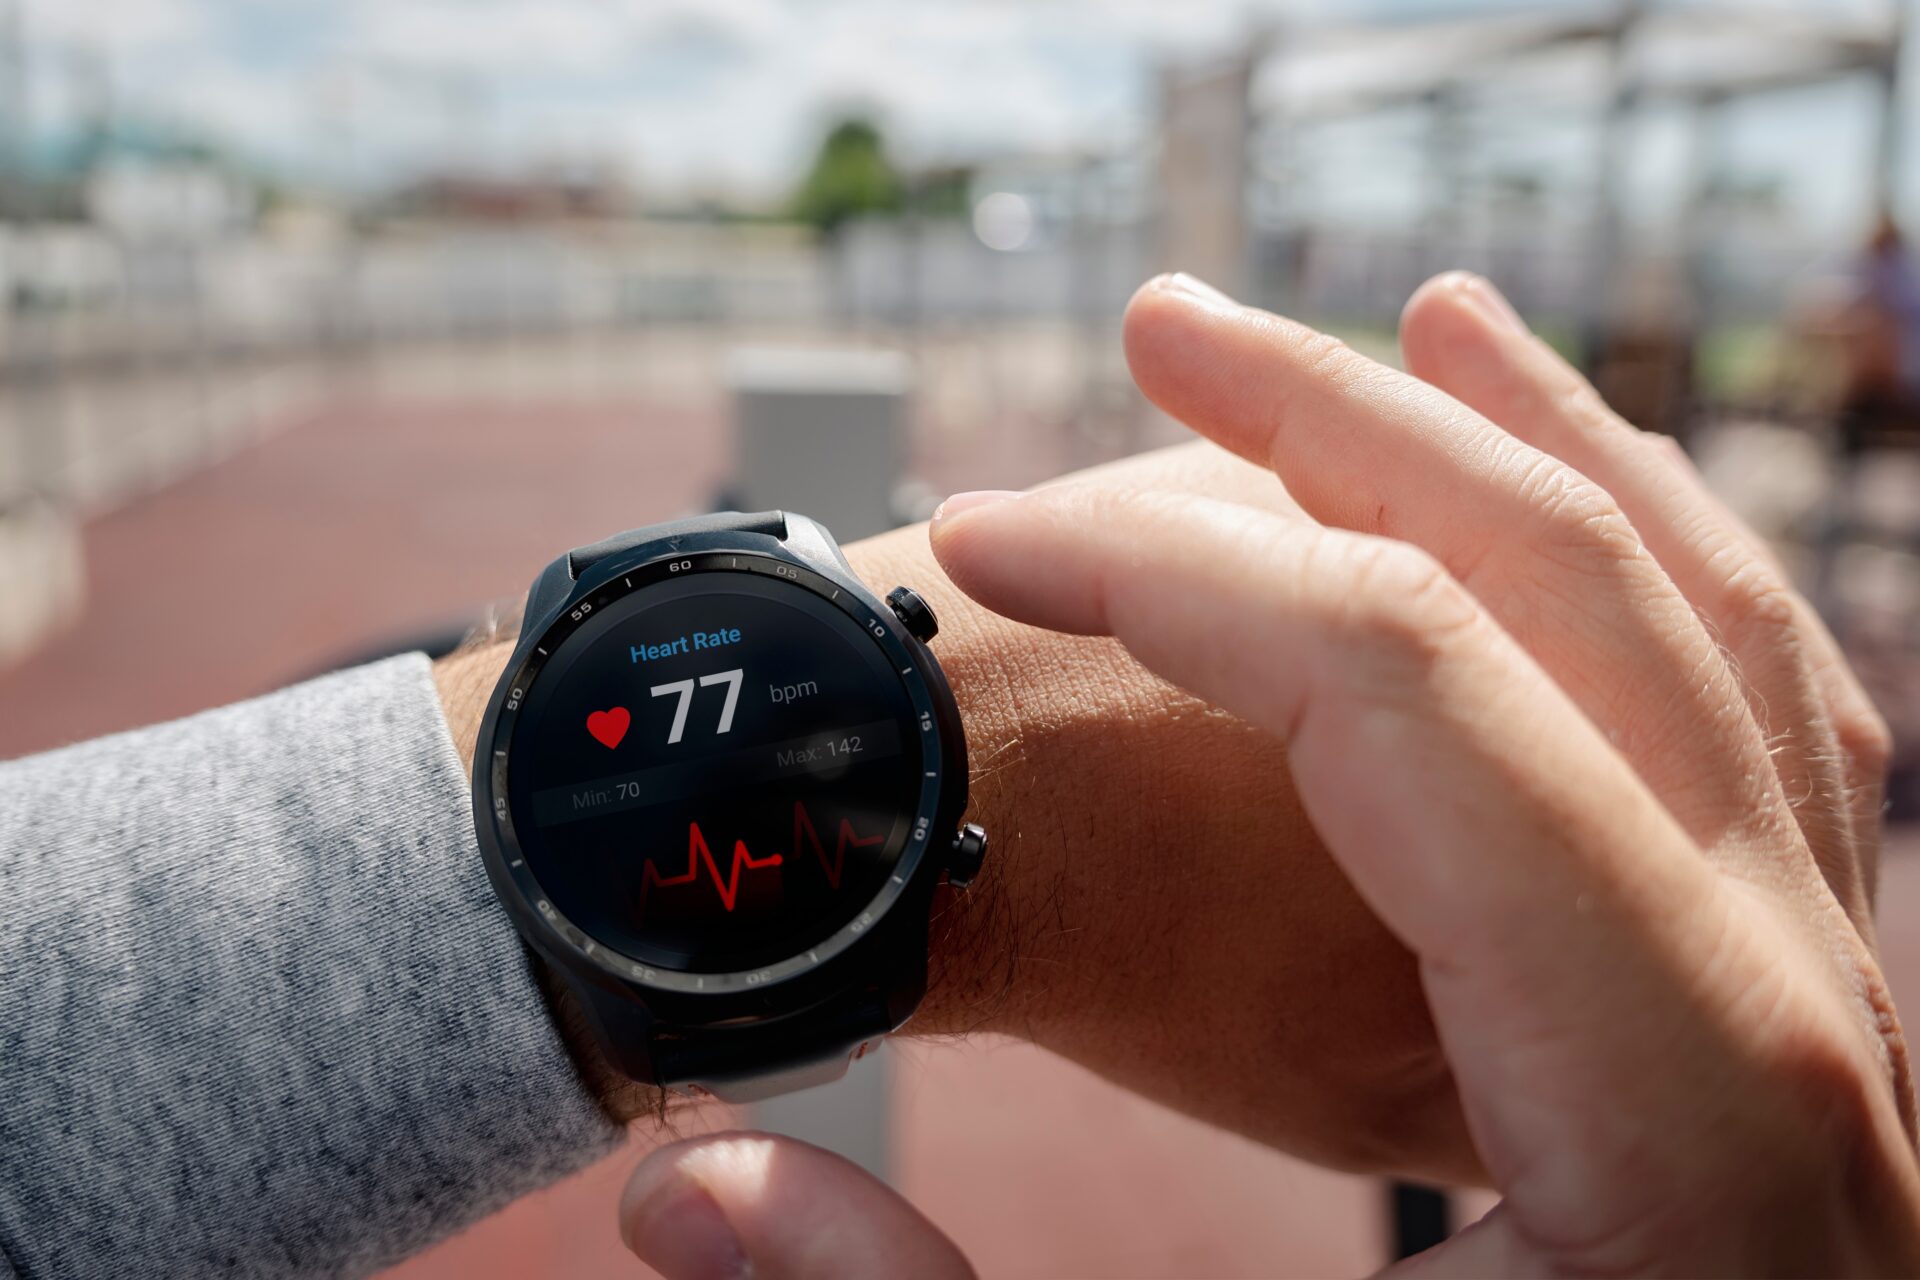 A close up view of a smart watch on a person's wrist displaying heart metrics